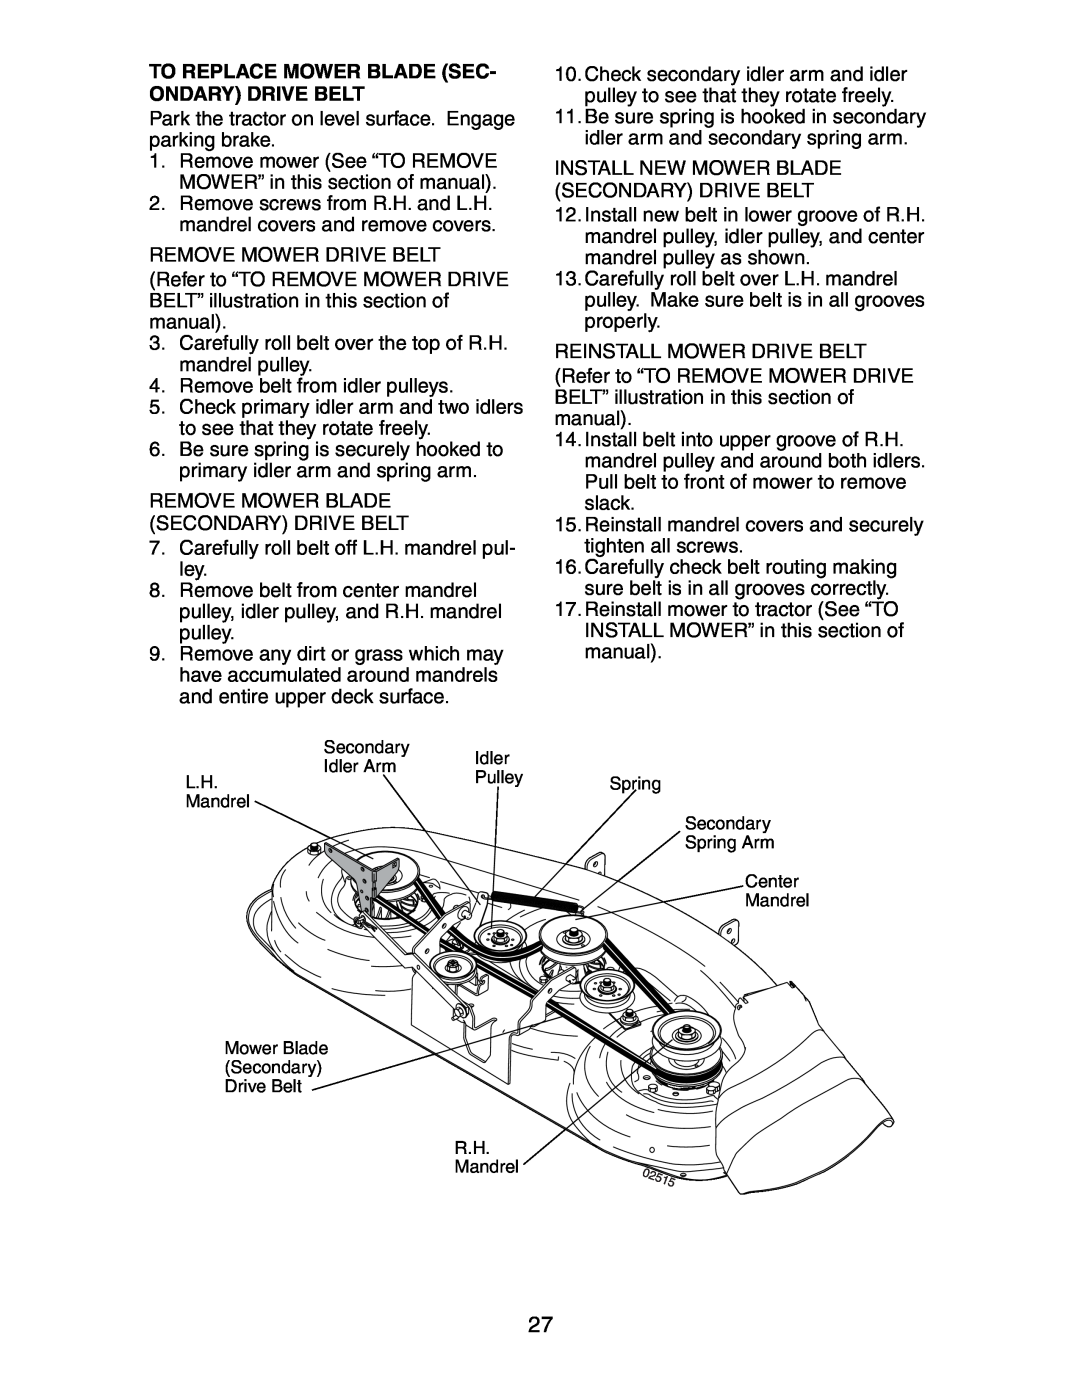 Poulan SP24H48YT manual To Replace Mower Blade Sec- Ondary Drive Belt 